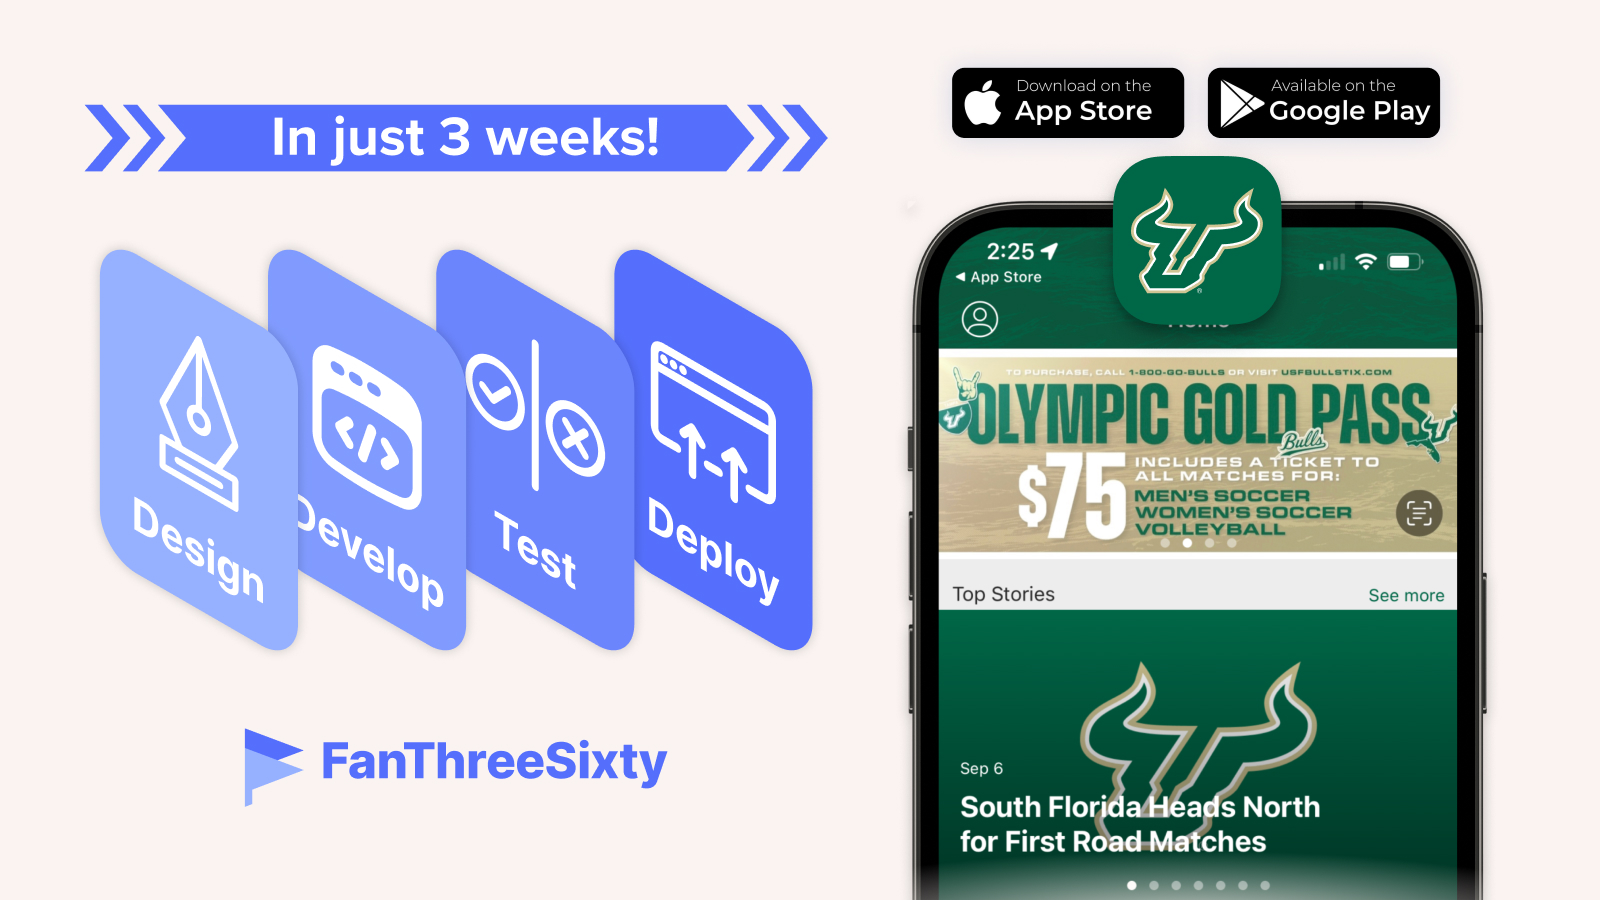 FanThreeSixty designed, developed, tested and deployed the USF Athletics app in 3 weeks